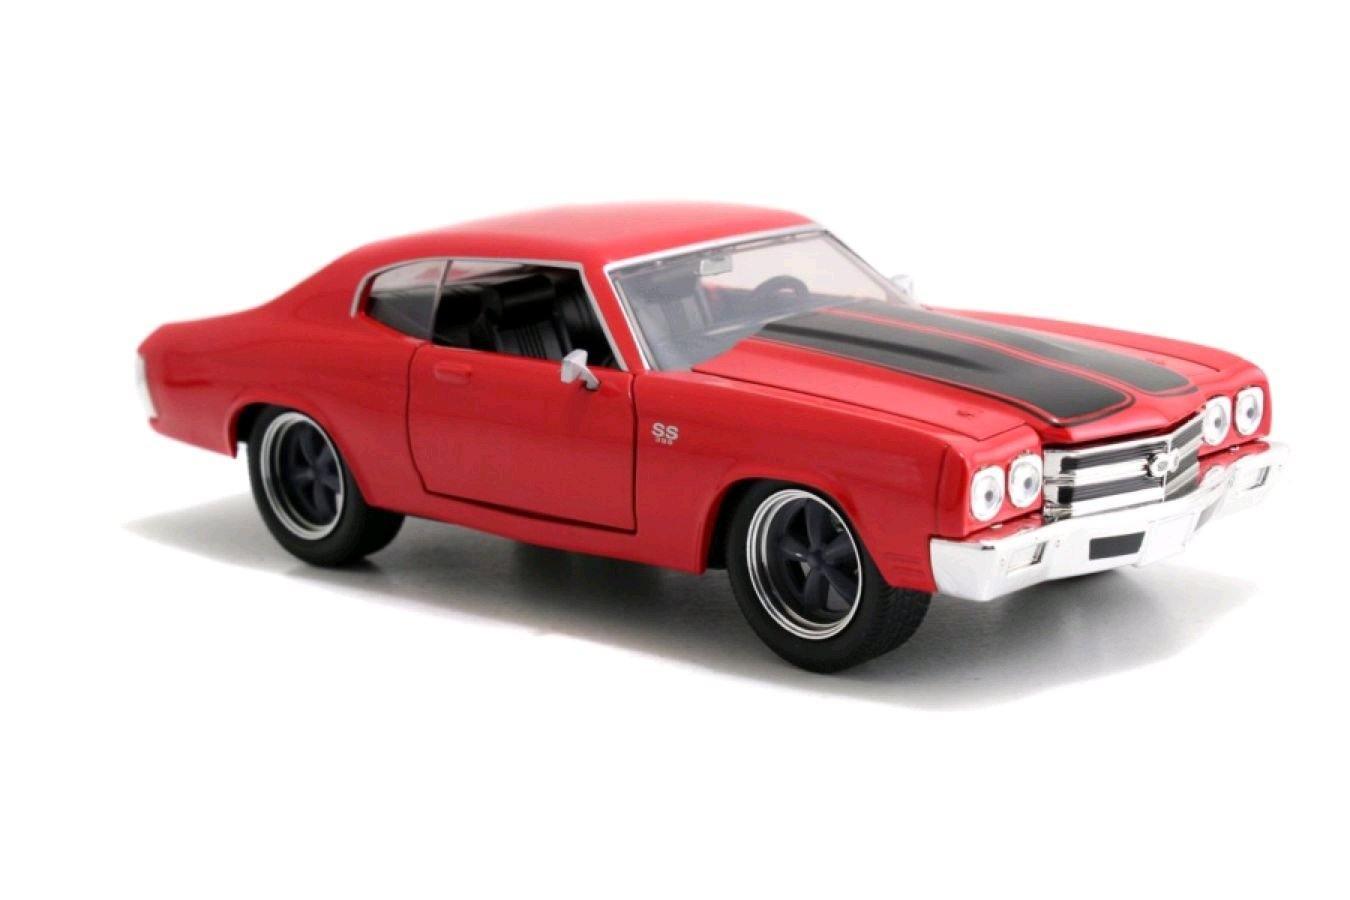 JAD97193 Fast and Furious - '70 Chevy Chevelle SS 1:24 Scale Hollywood Ride - Jada Toys - Titan Pop Culture